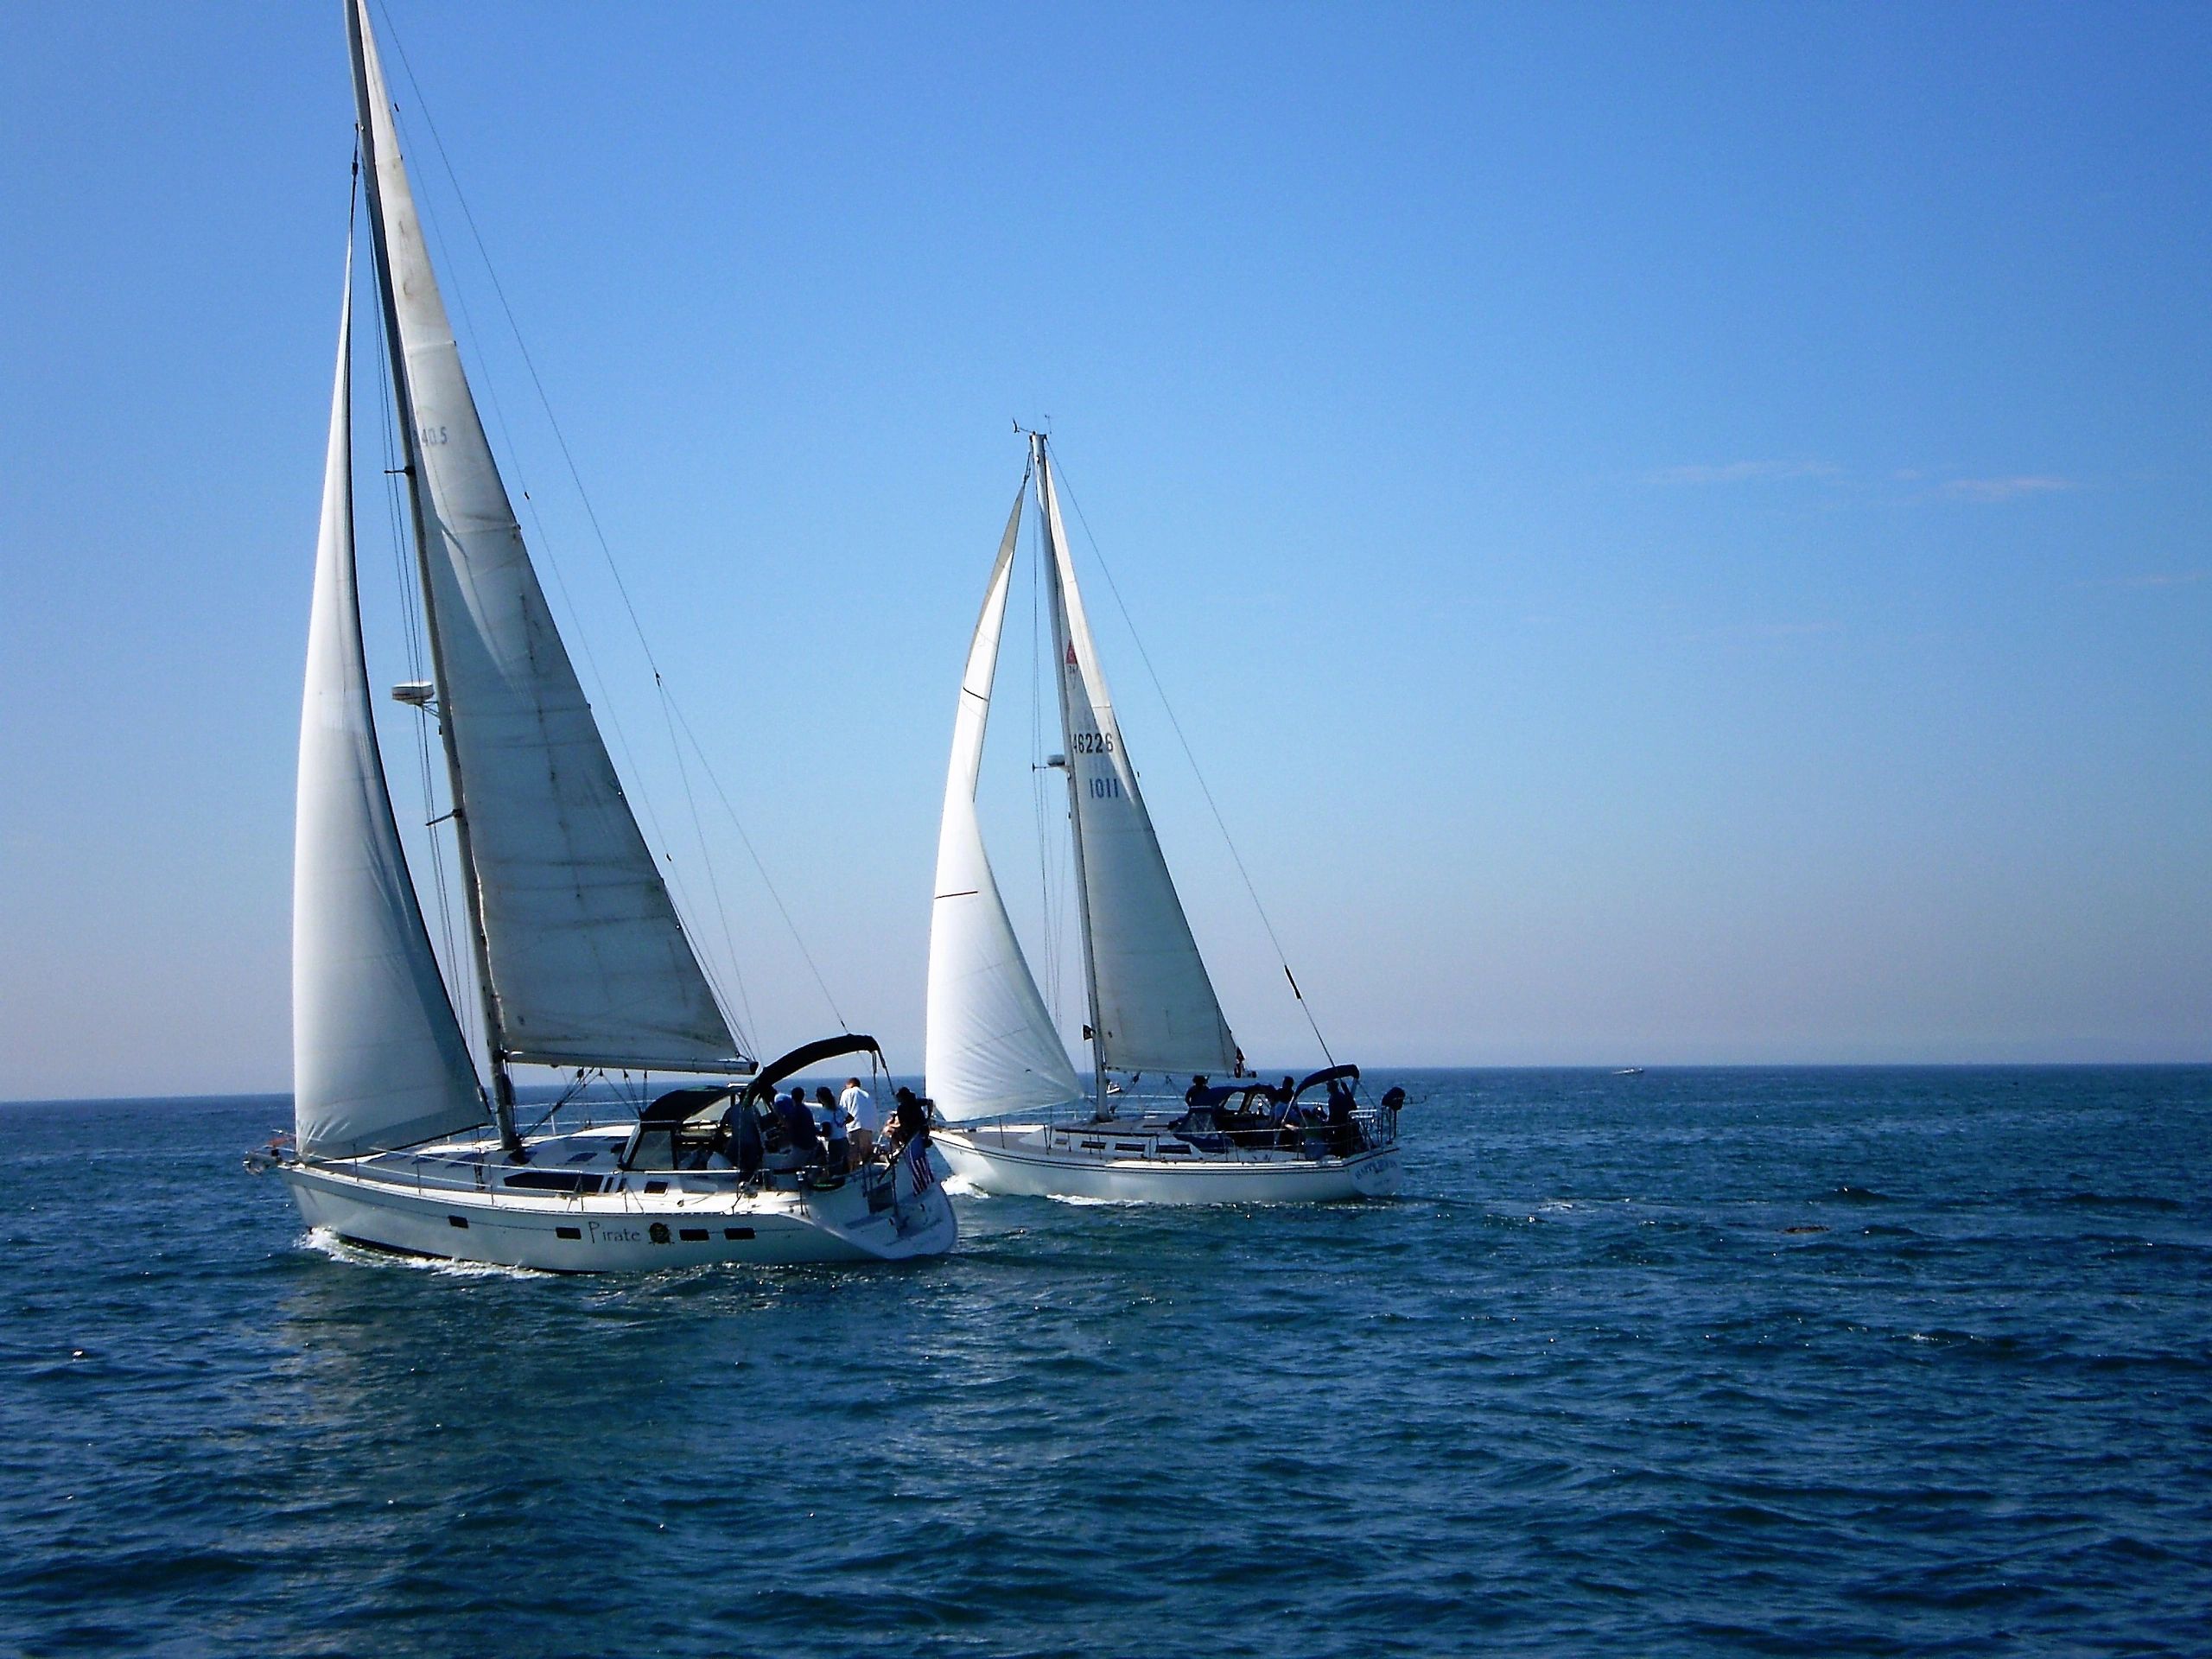 Waypoint Sailing corporate sailboat race off the Southern California coast.  